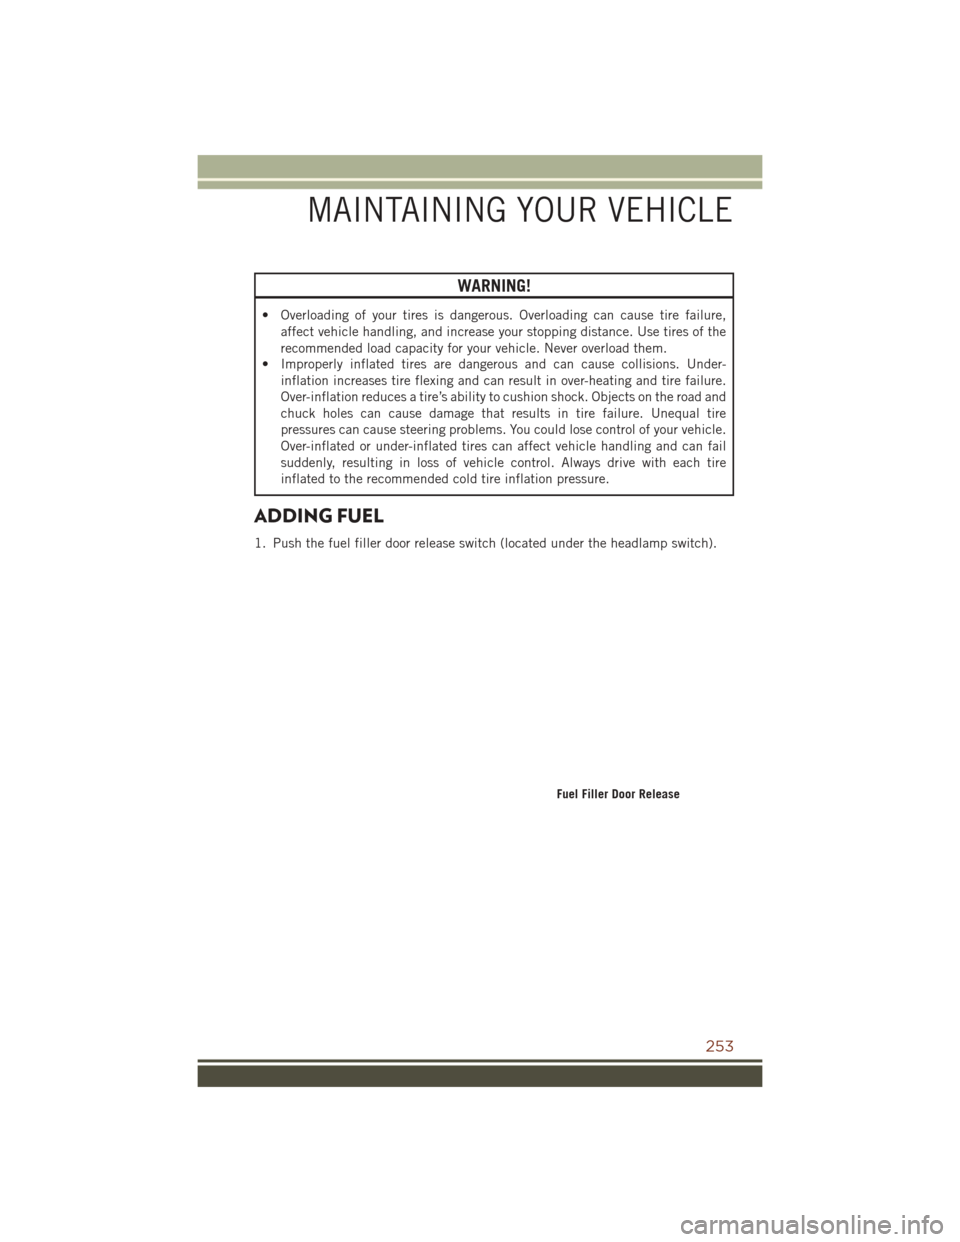 JEEP GRAND CHEROKEE 2016 WK2 / 4.G User Guide WARNING!
• Overloading of your tires is dangerous. Overloading can cause tire failure,affect vehicle handling, and increase your stopping distance. Use tires of the
recommended load capacity for you